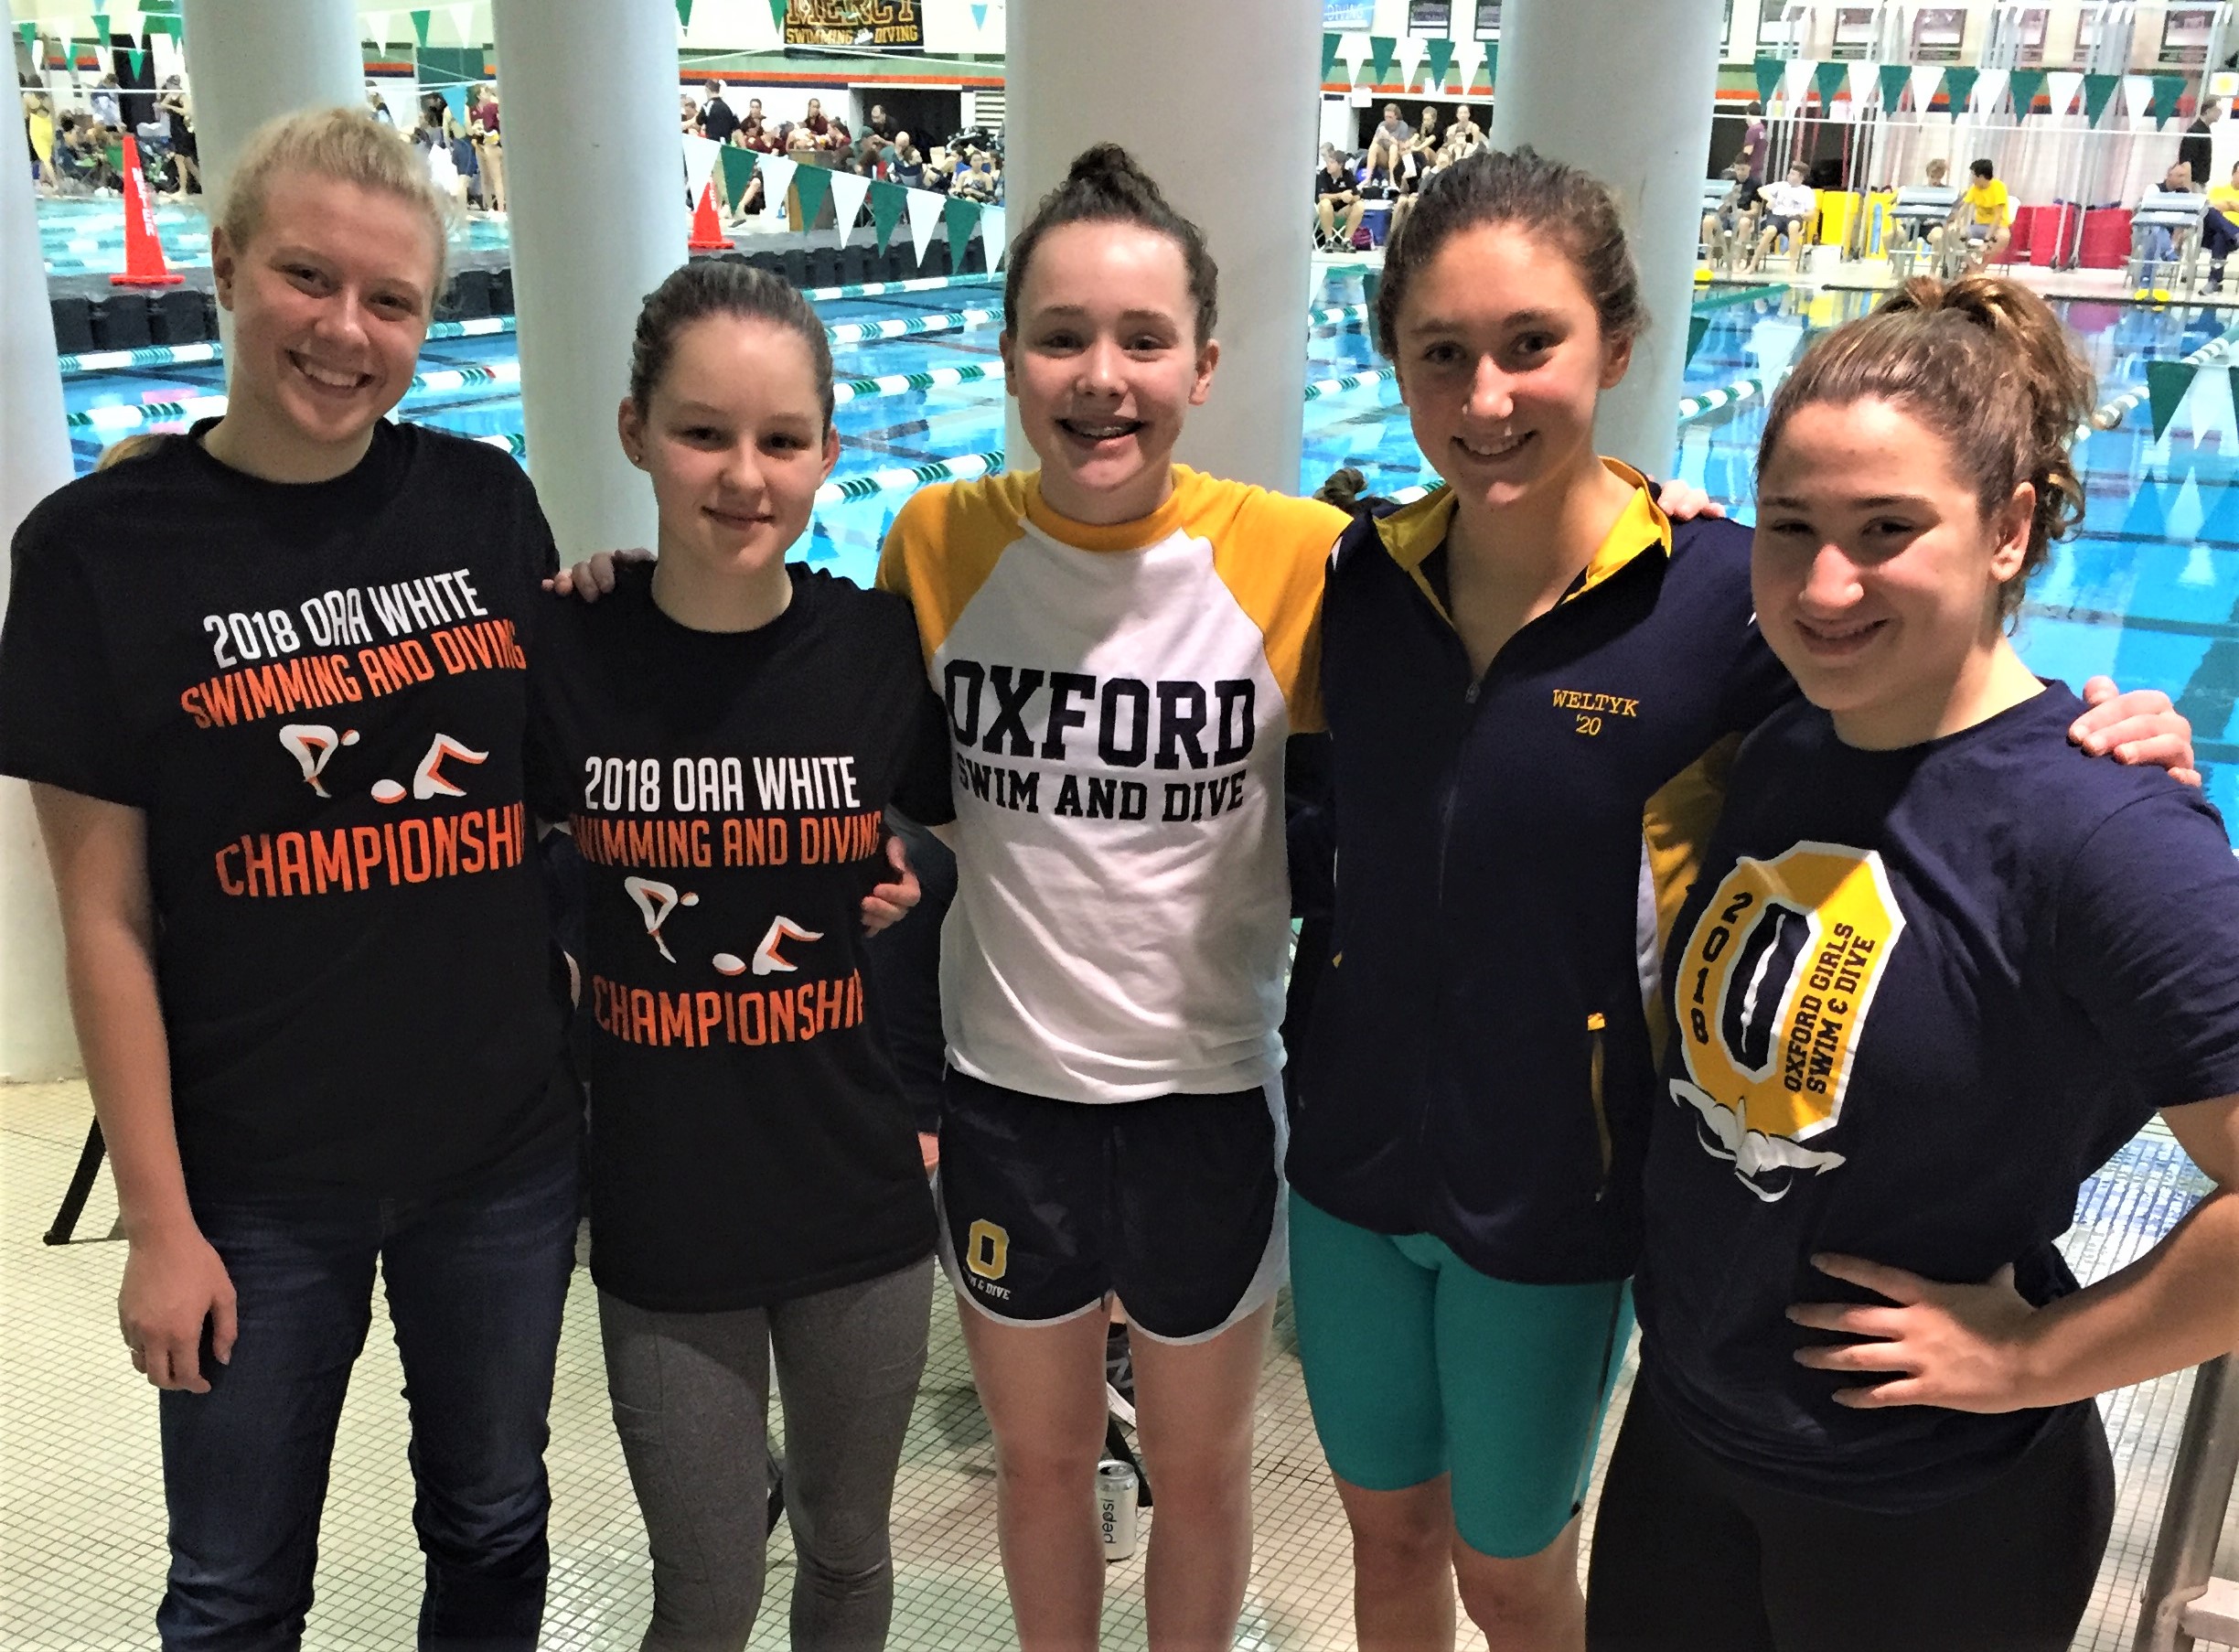 Grace Charnstrom (from left), Cali Schnur, Jenna Fistler, Ashlee Weltyk and Keira Veltigian represented Wildcat swim at the state meet. Photo provided.